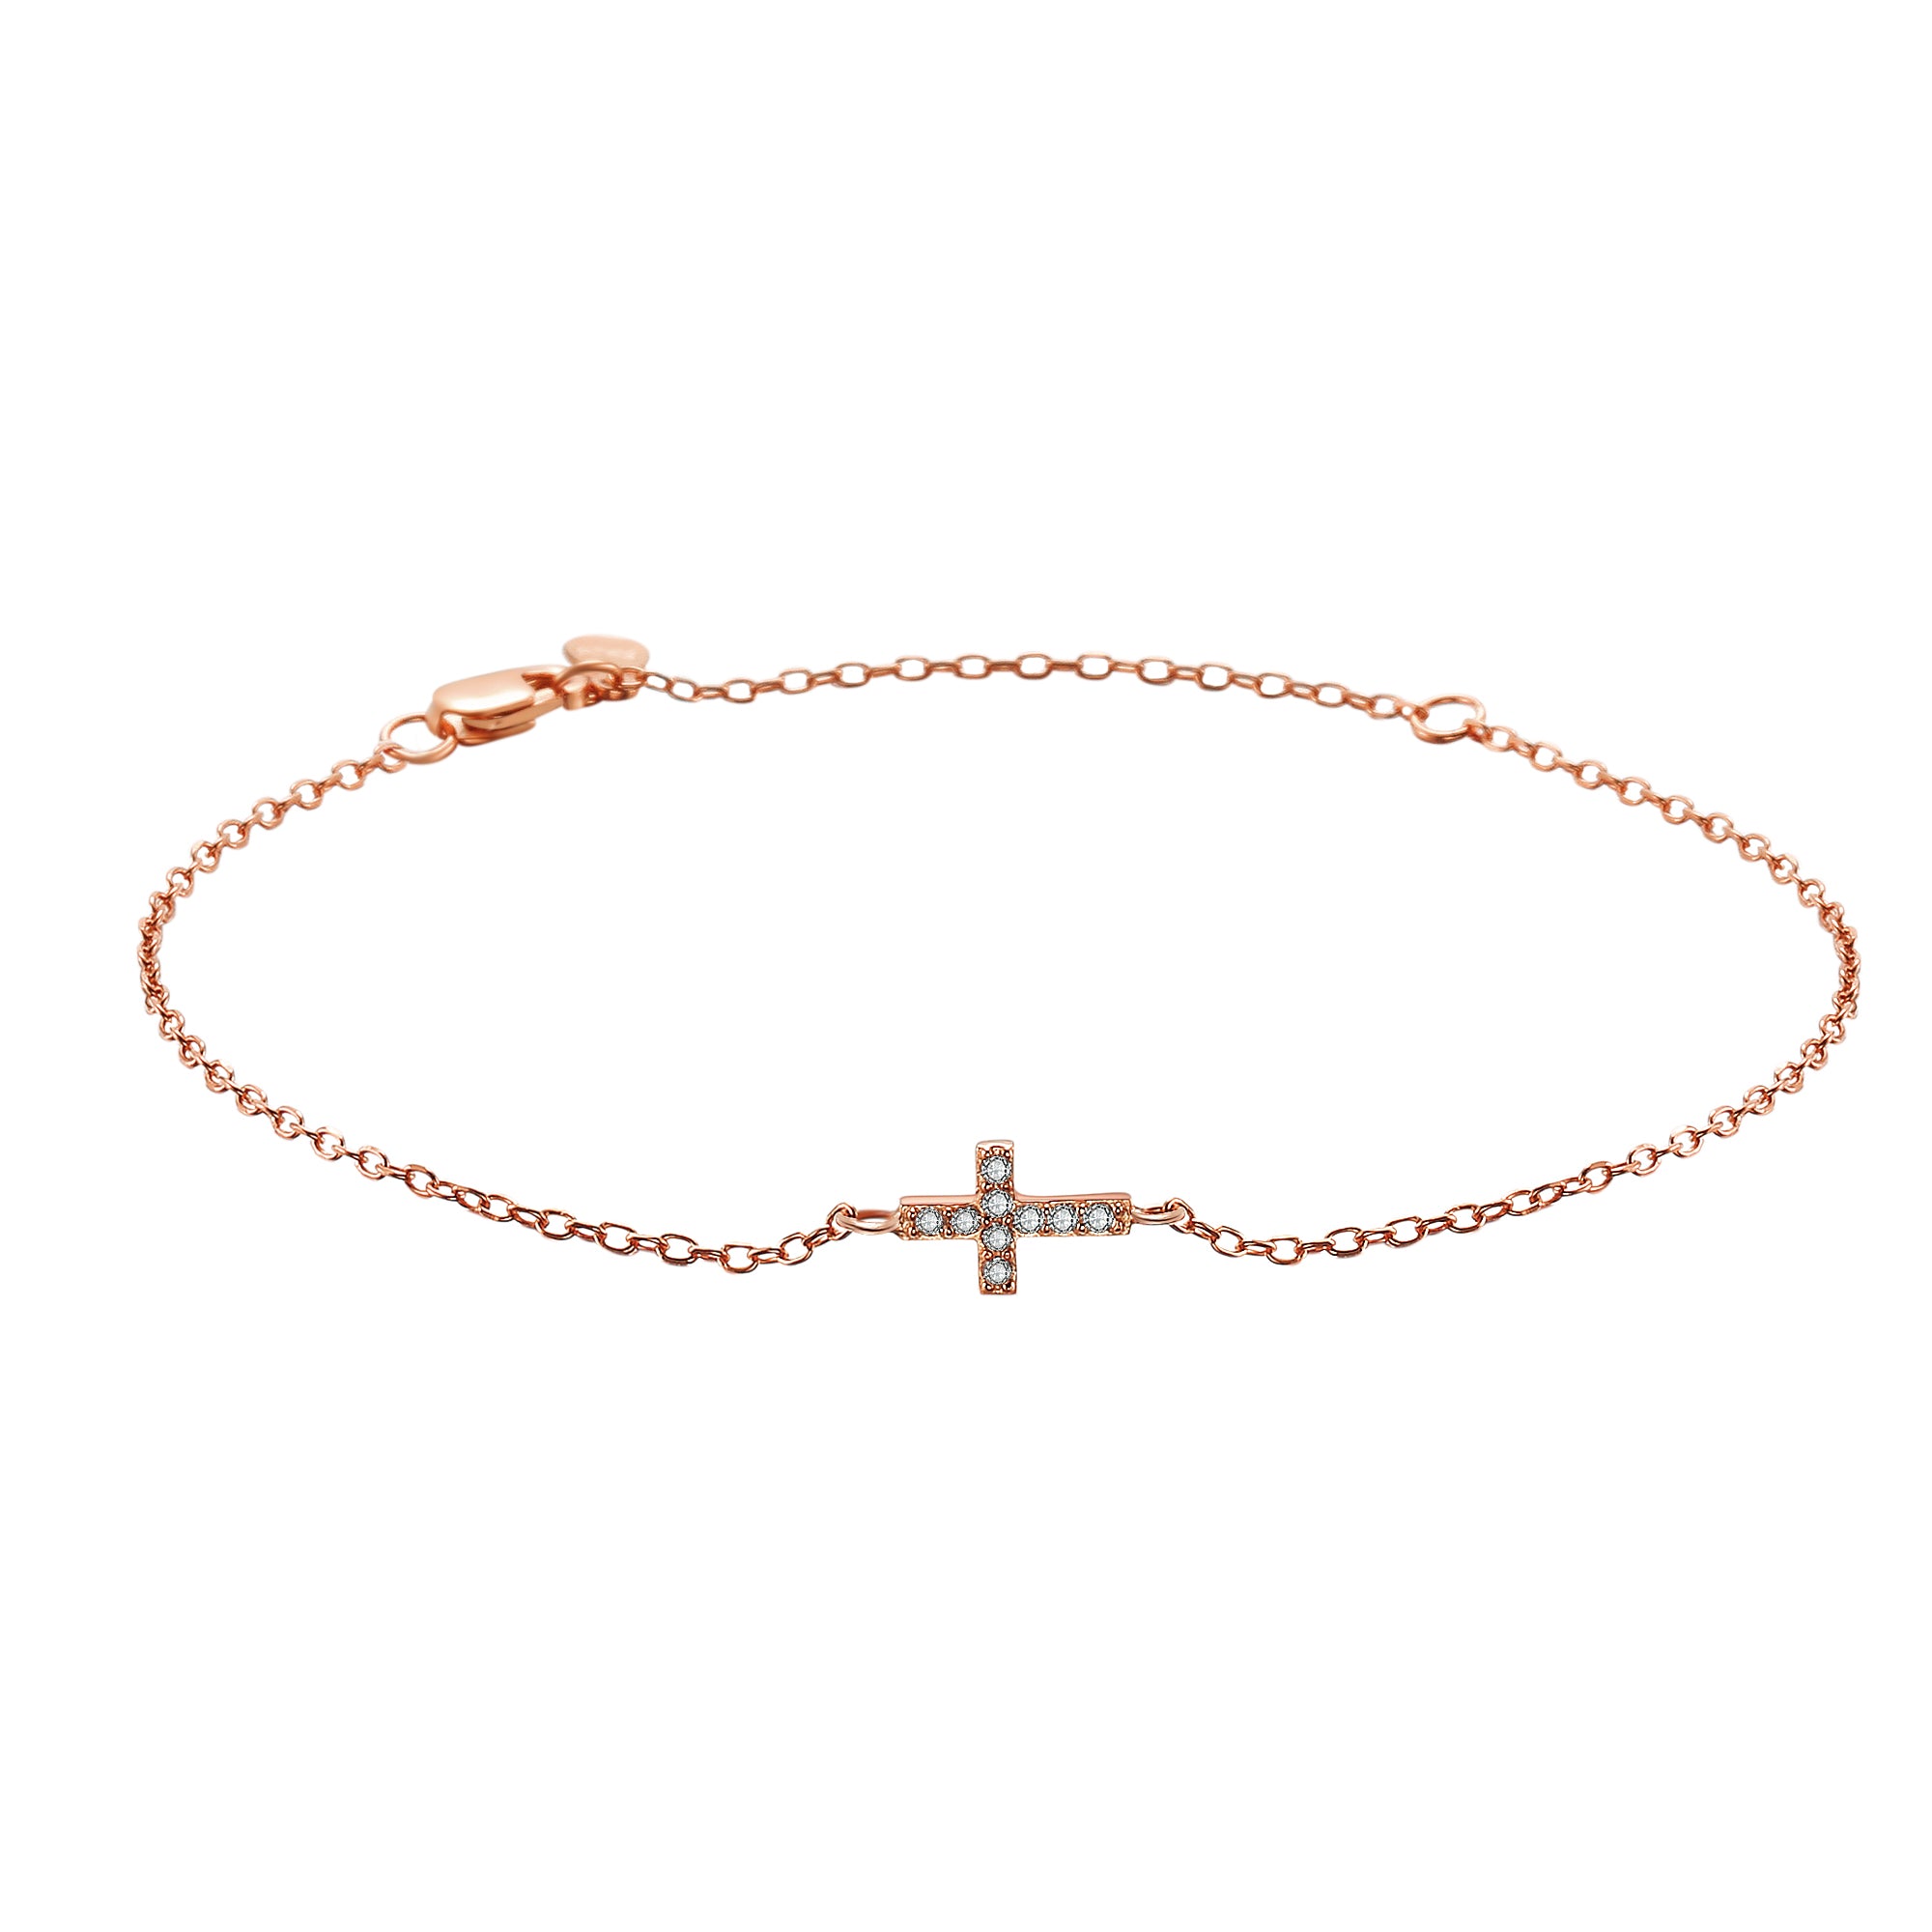 High Quality Beautiful Cross Bracelets from China , Adjustable Chain Bracelet